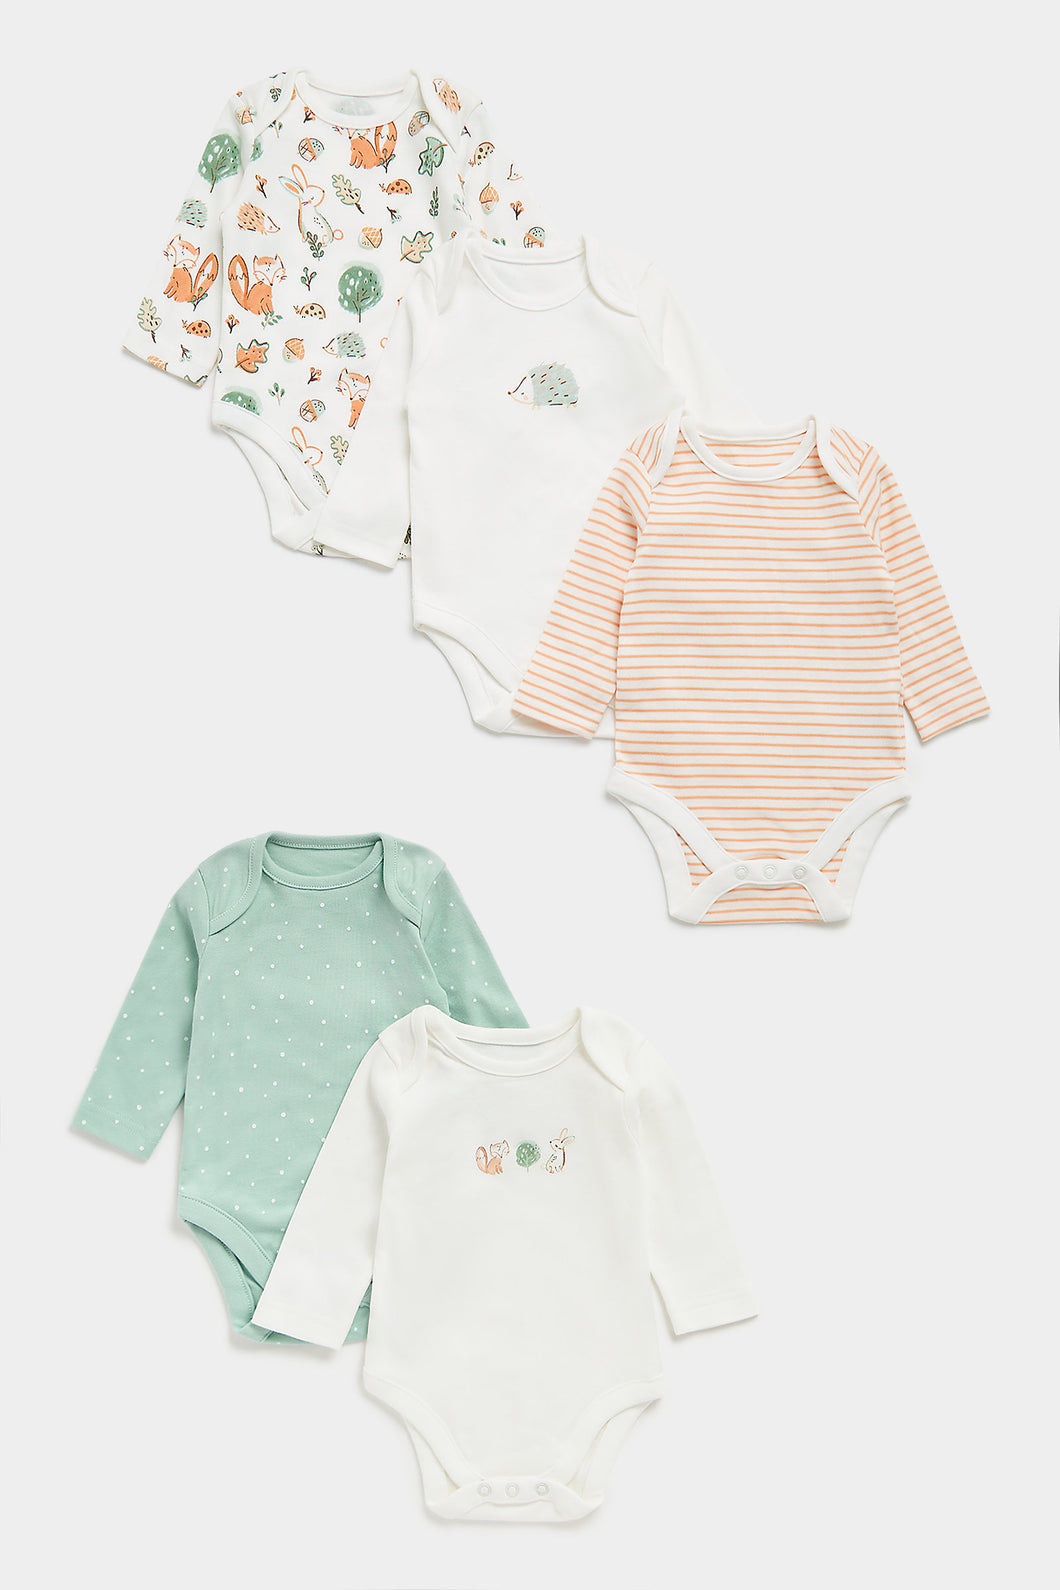 Mothercare Woodland Long-Sleeved Baby Bodysuits - 5 Pack